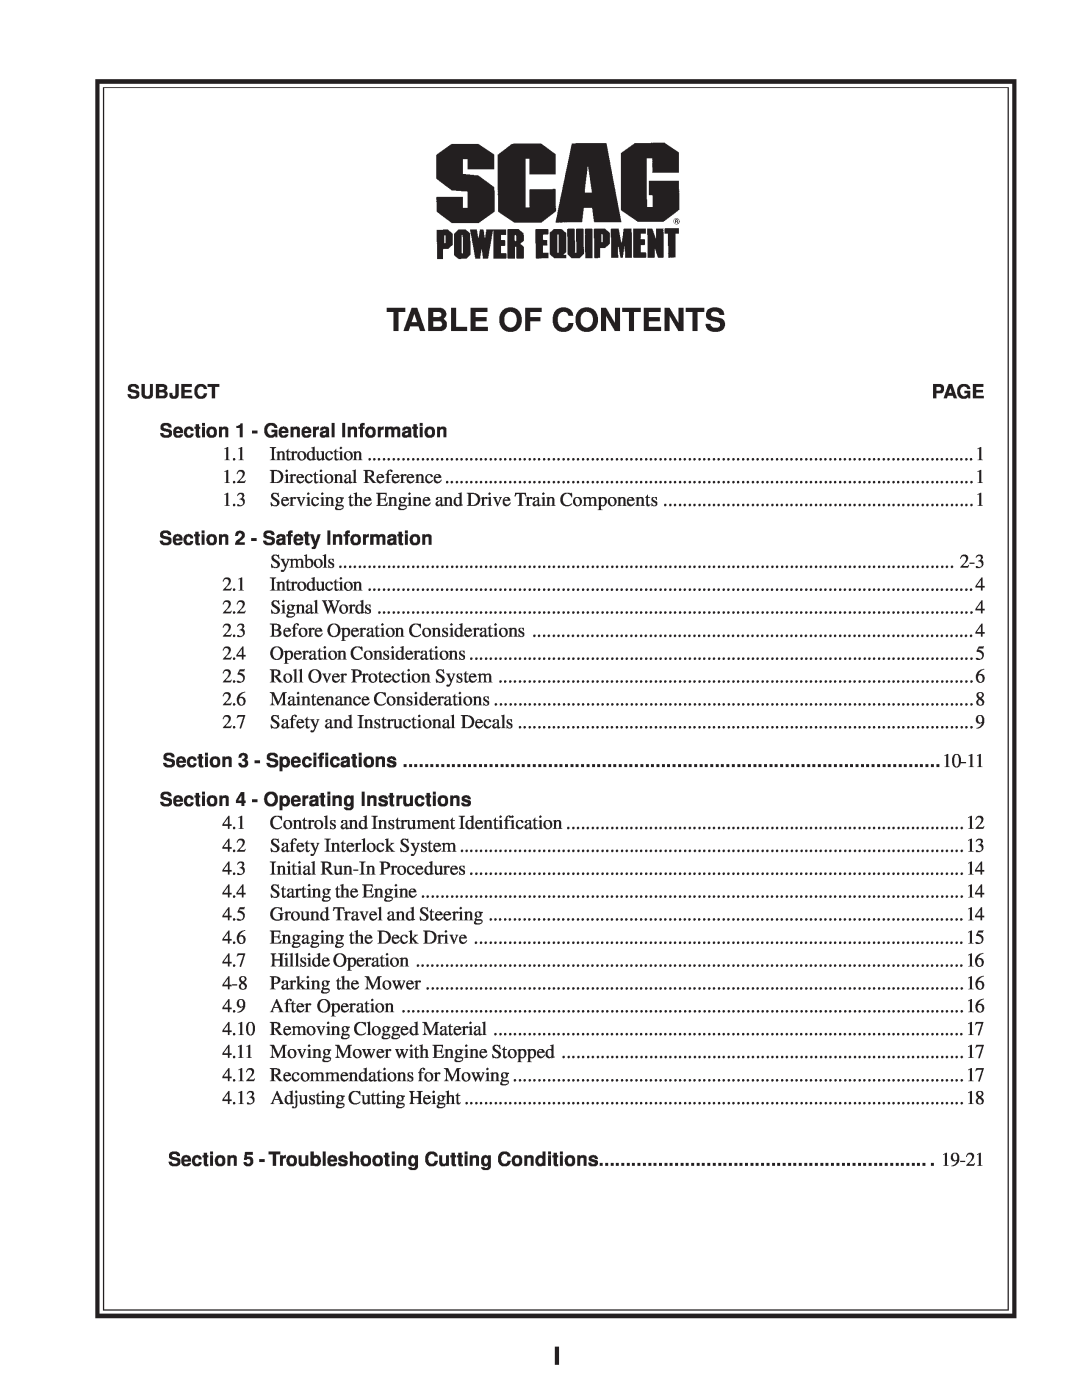 Scag Power Equipment STT-31BSD Table Of Contents, Subject, General Information, Safety Information, Operating Instructions 